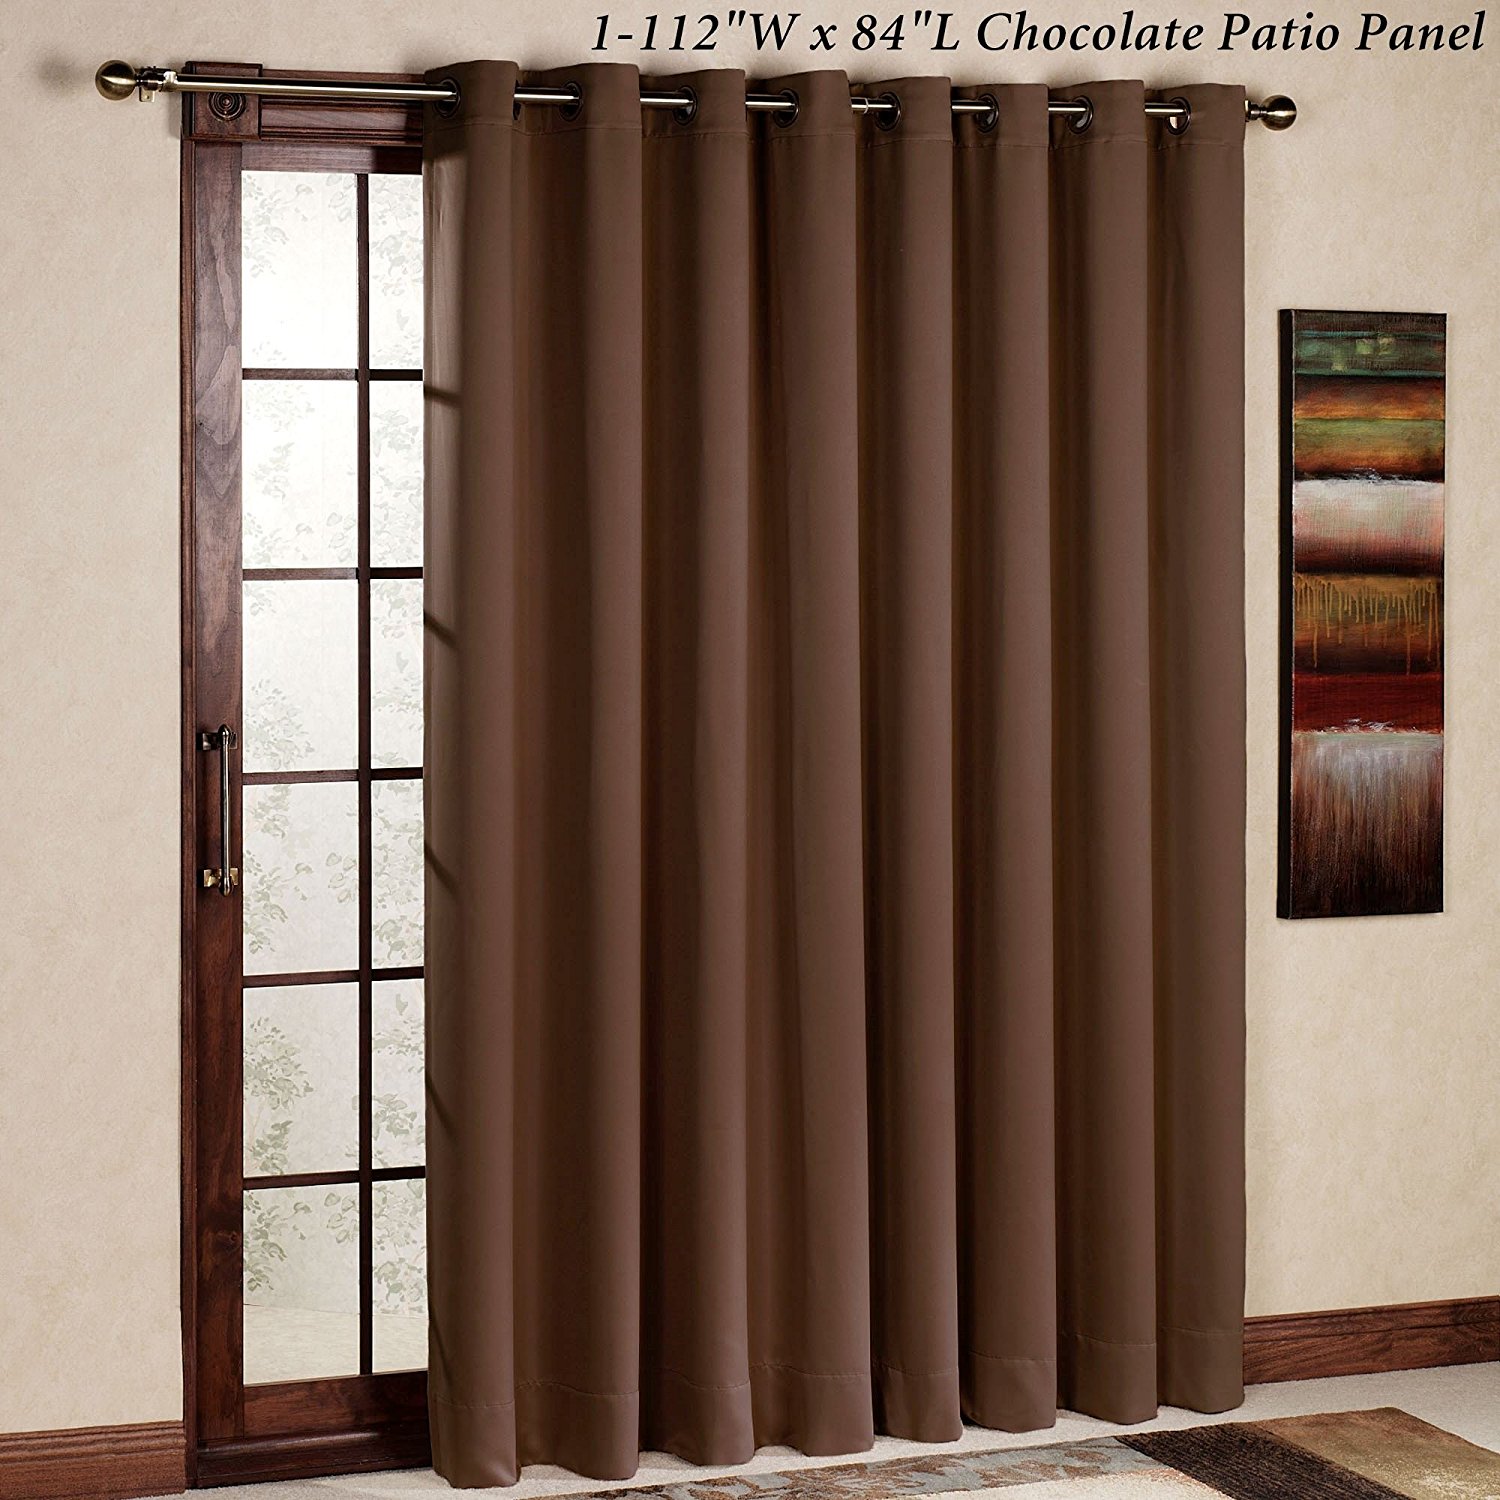 RHF Thermal Insulated Blackout Patio door Curtain Panel, Sliding door curtains, Wide curtains: 100W by 84L Inches-Chocolate